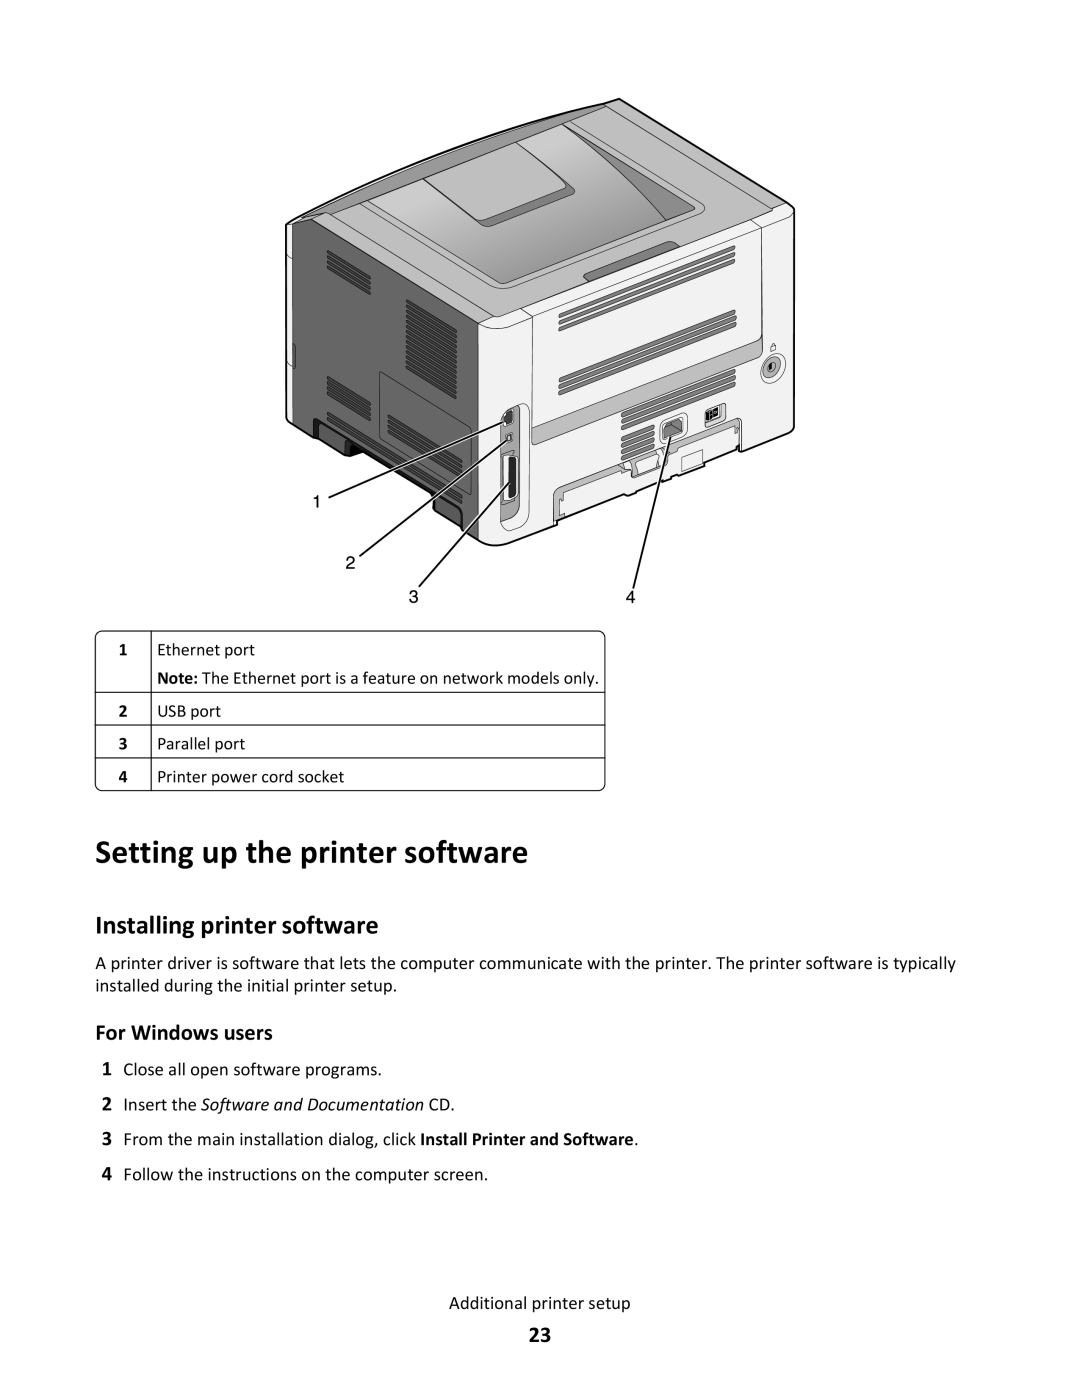 Lexmark 34S5164, 34S0100, 34S0305, 34S0300 Setting up the printer software, Installing printer software, For Windows users 